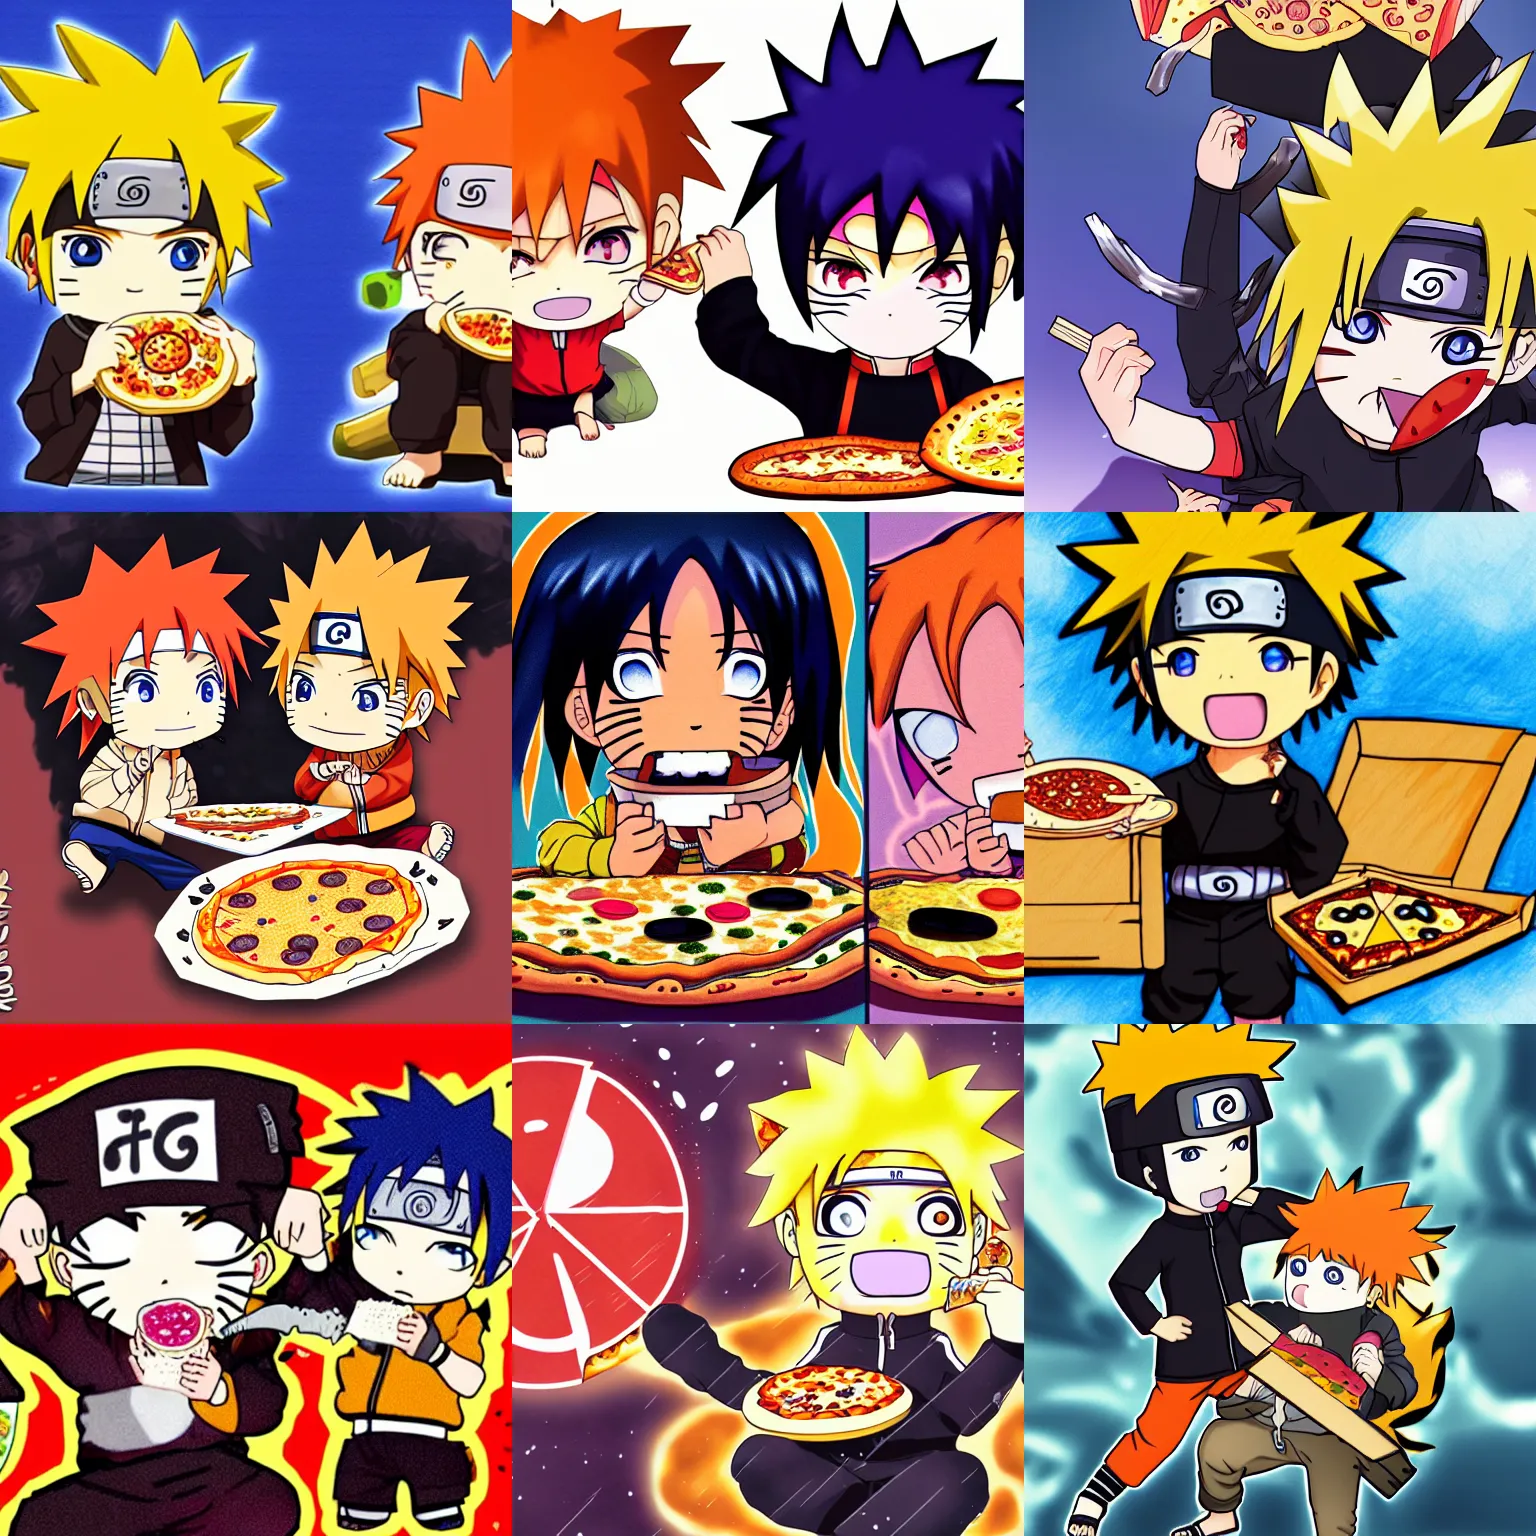 Prompt: Chibi Naruto biting into a pizza, Chibi Naruto biting into a pizza, Chibi Naruto biting into a pizza, digital art, hyper detailed, high definition, 4k, HDR, pencil drawing, eating, munching pizza